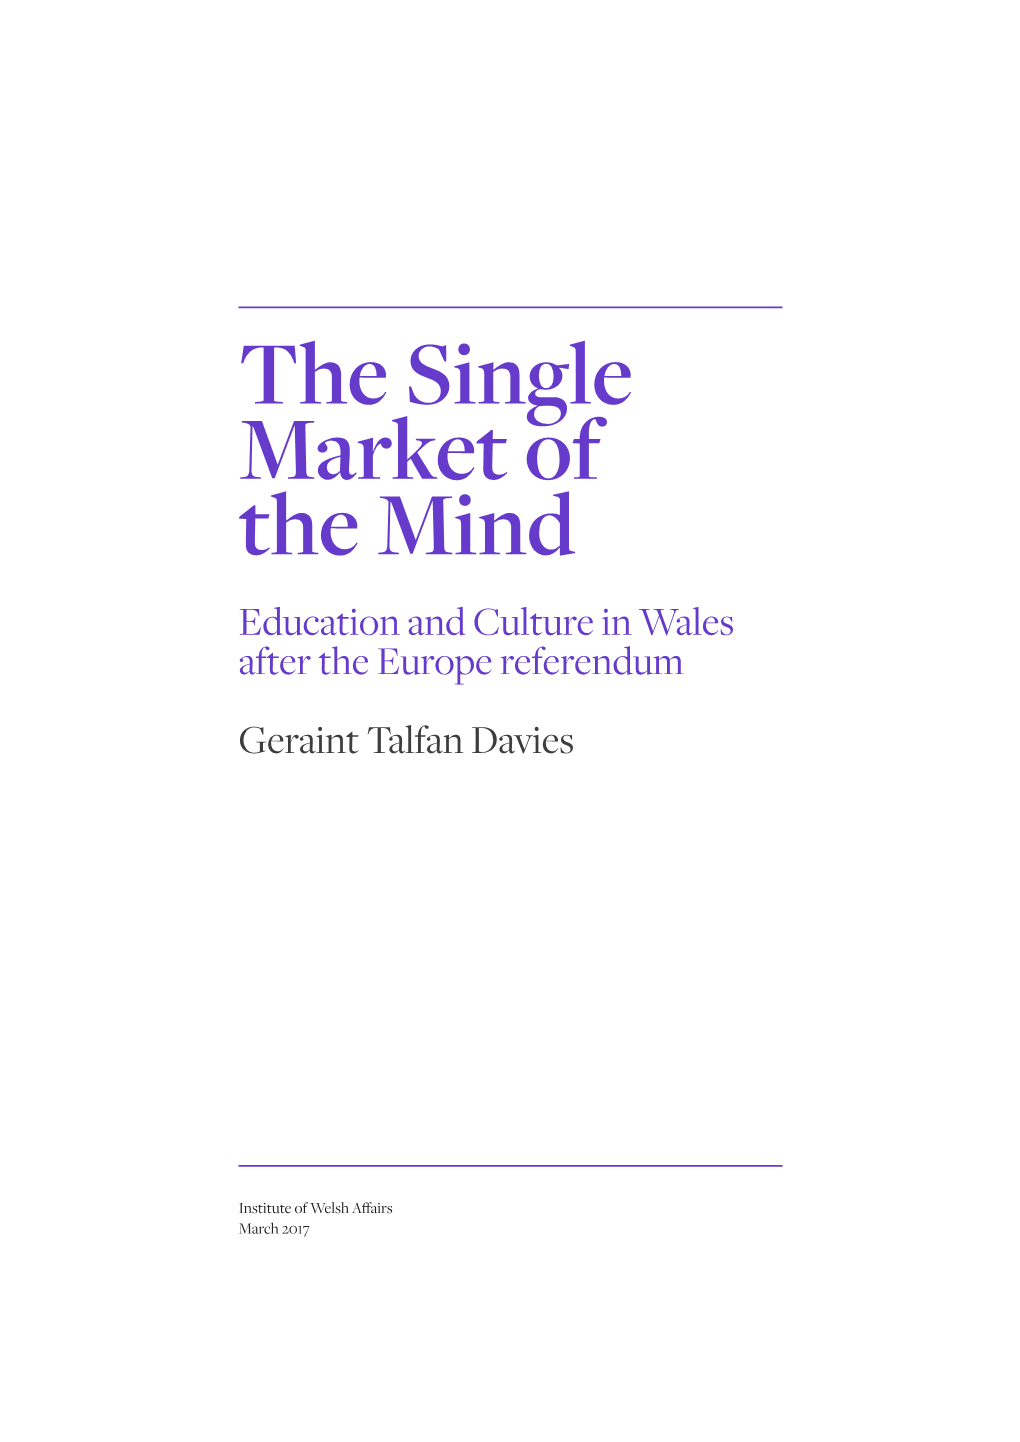 The Single Market of the Mind